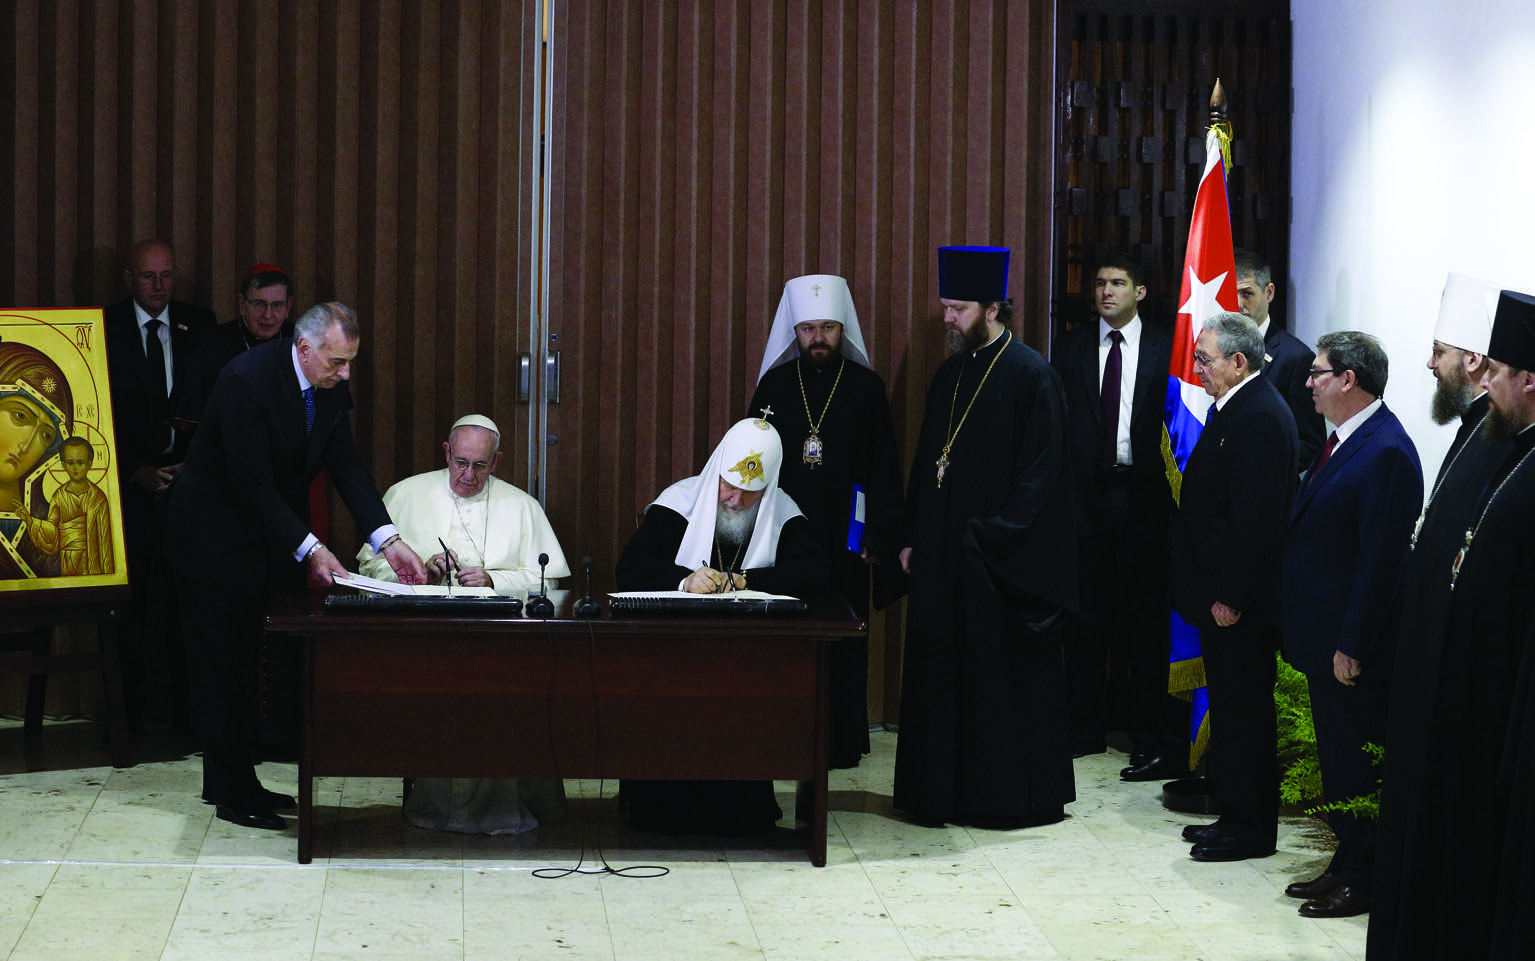 Pope Francis and Russian Orthodox Patriarch Kirill of Moscow sign a joint declaration during a meeting at Jose Marti International Airport in Havana Feb. 12. Standing in front of Cuba's flag is Cuban President Raul Castro. (CNS photo/Paul Haring) See POPE-PATRIARCH-CUBA Feb. 12, 2016.